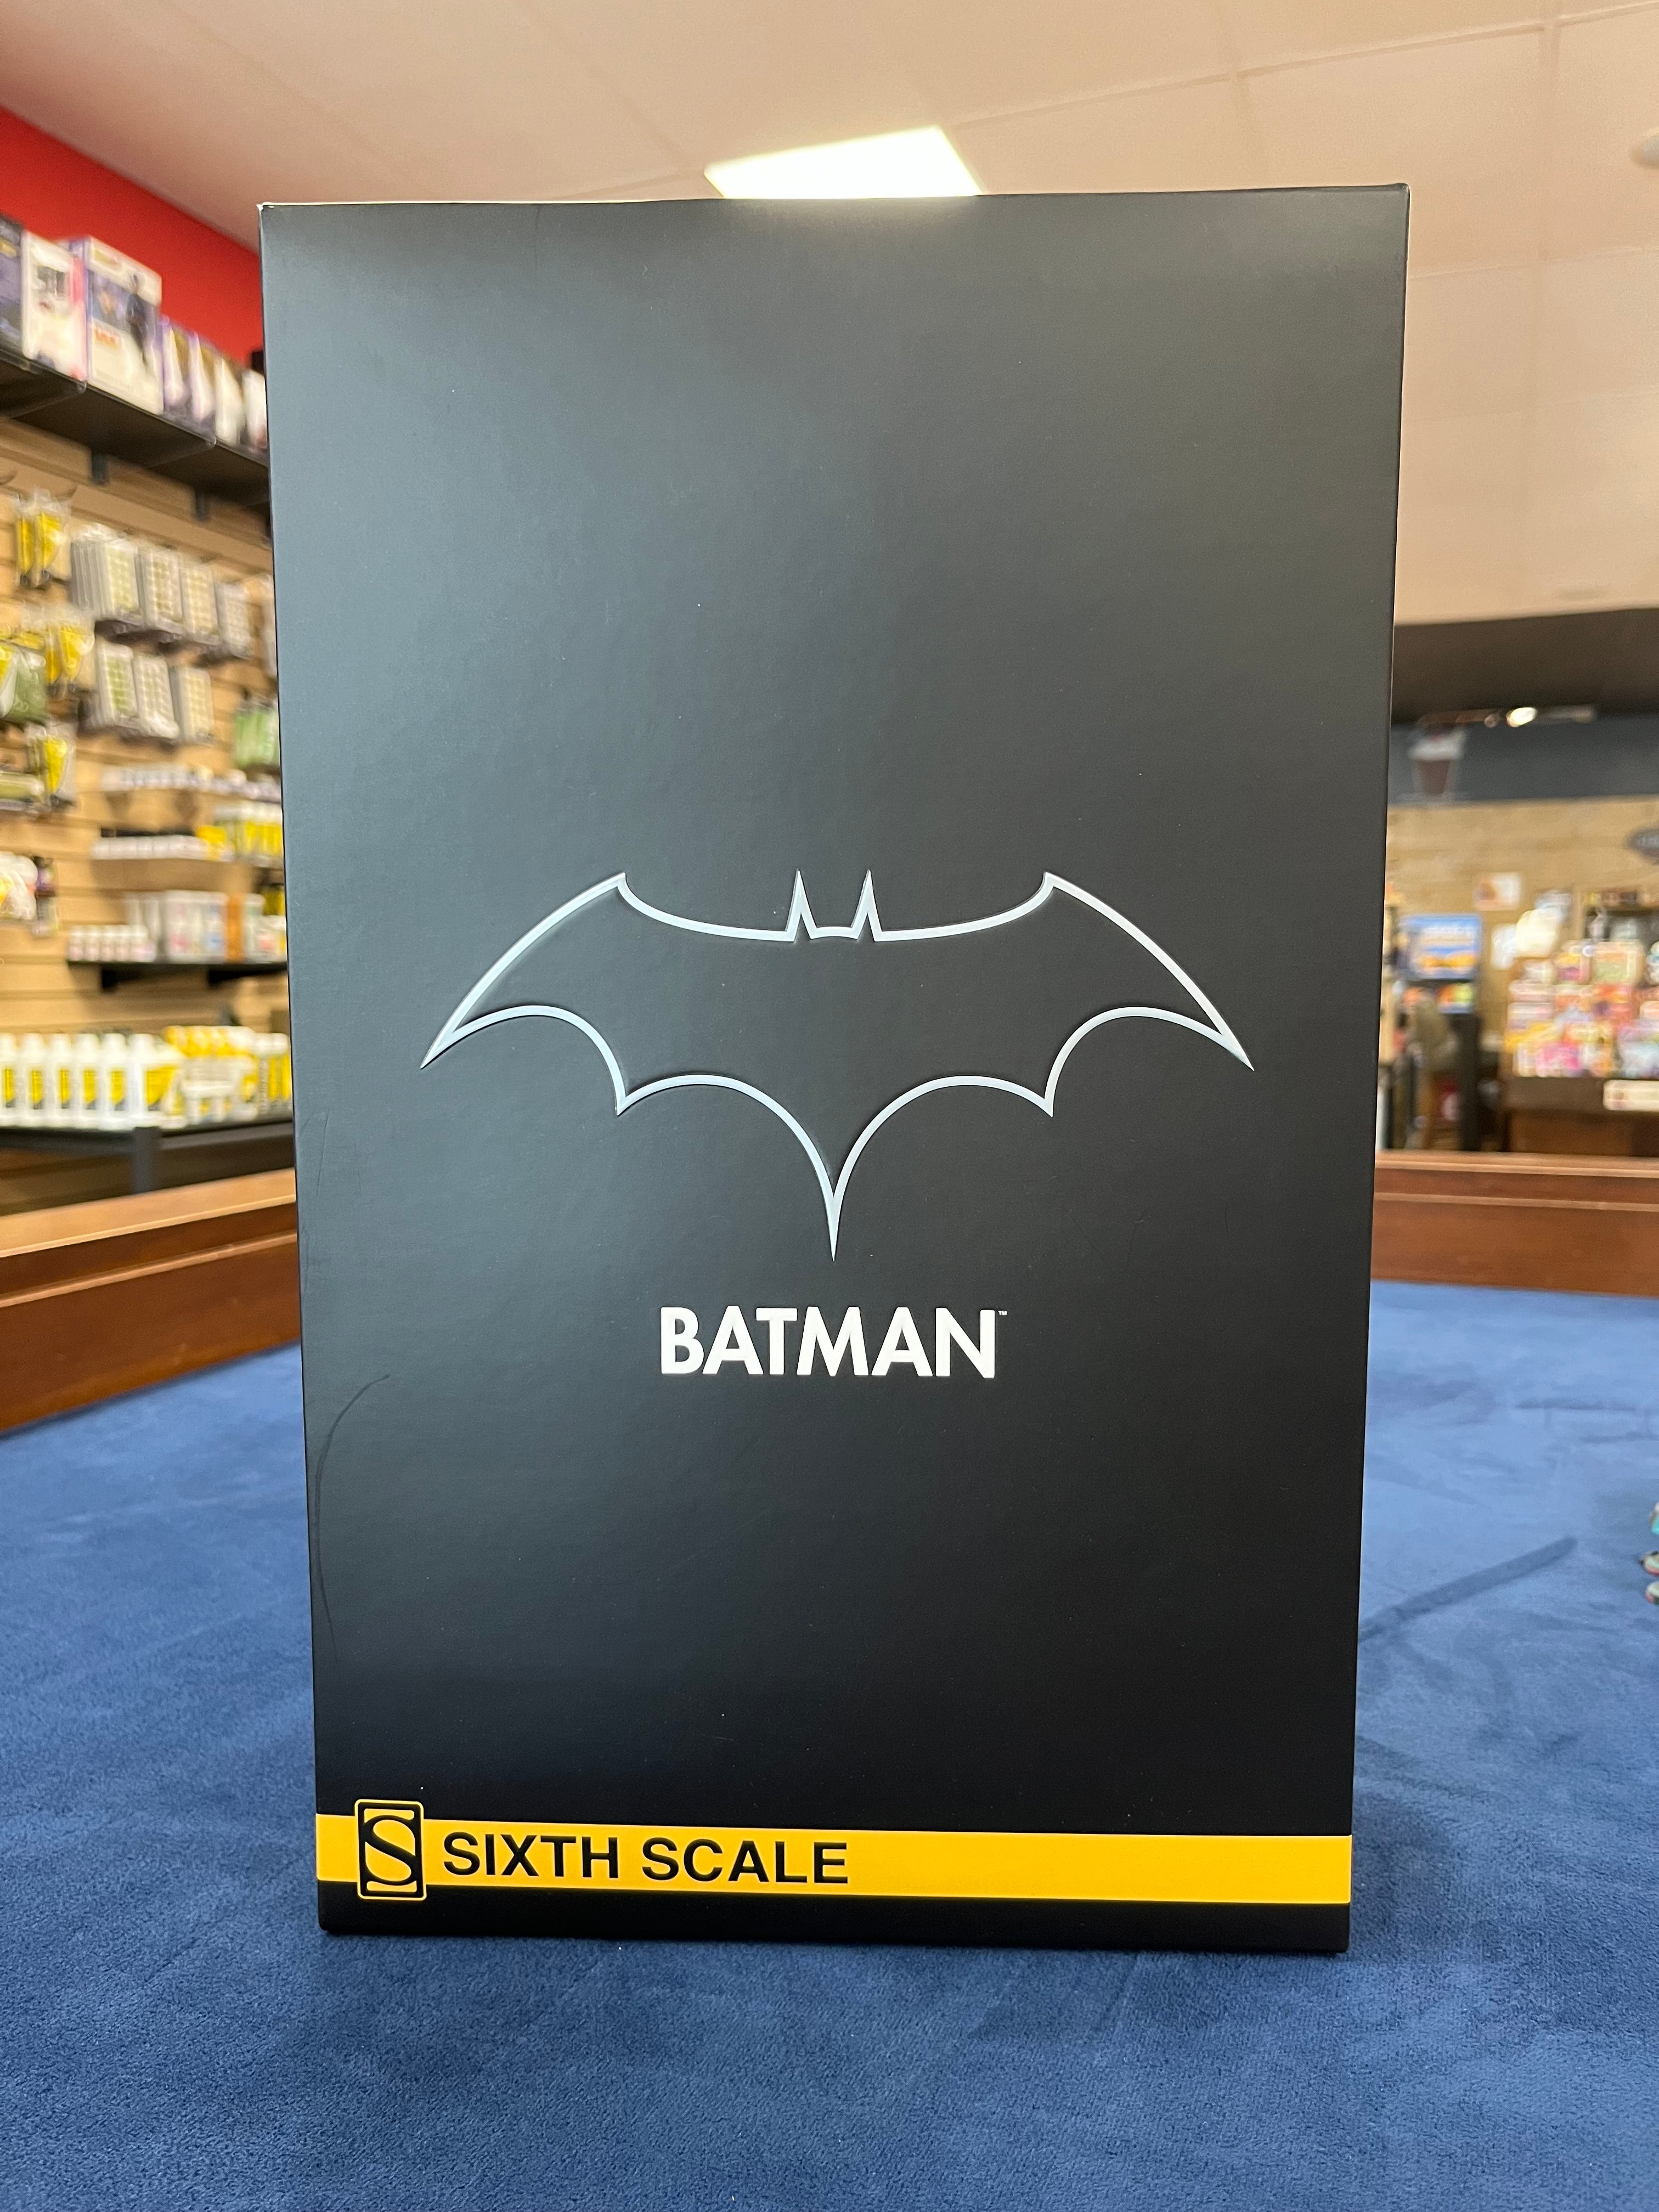 DC Comics Batman Sixth Scale Figure by Sideshow Collectibles – The